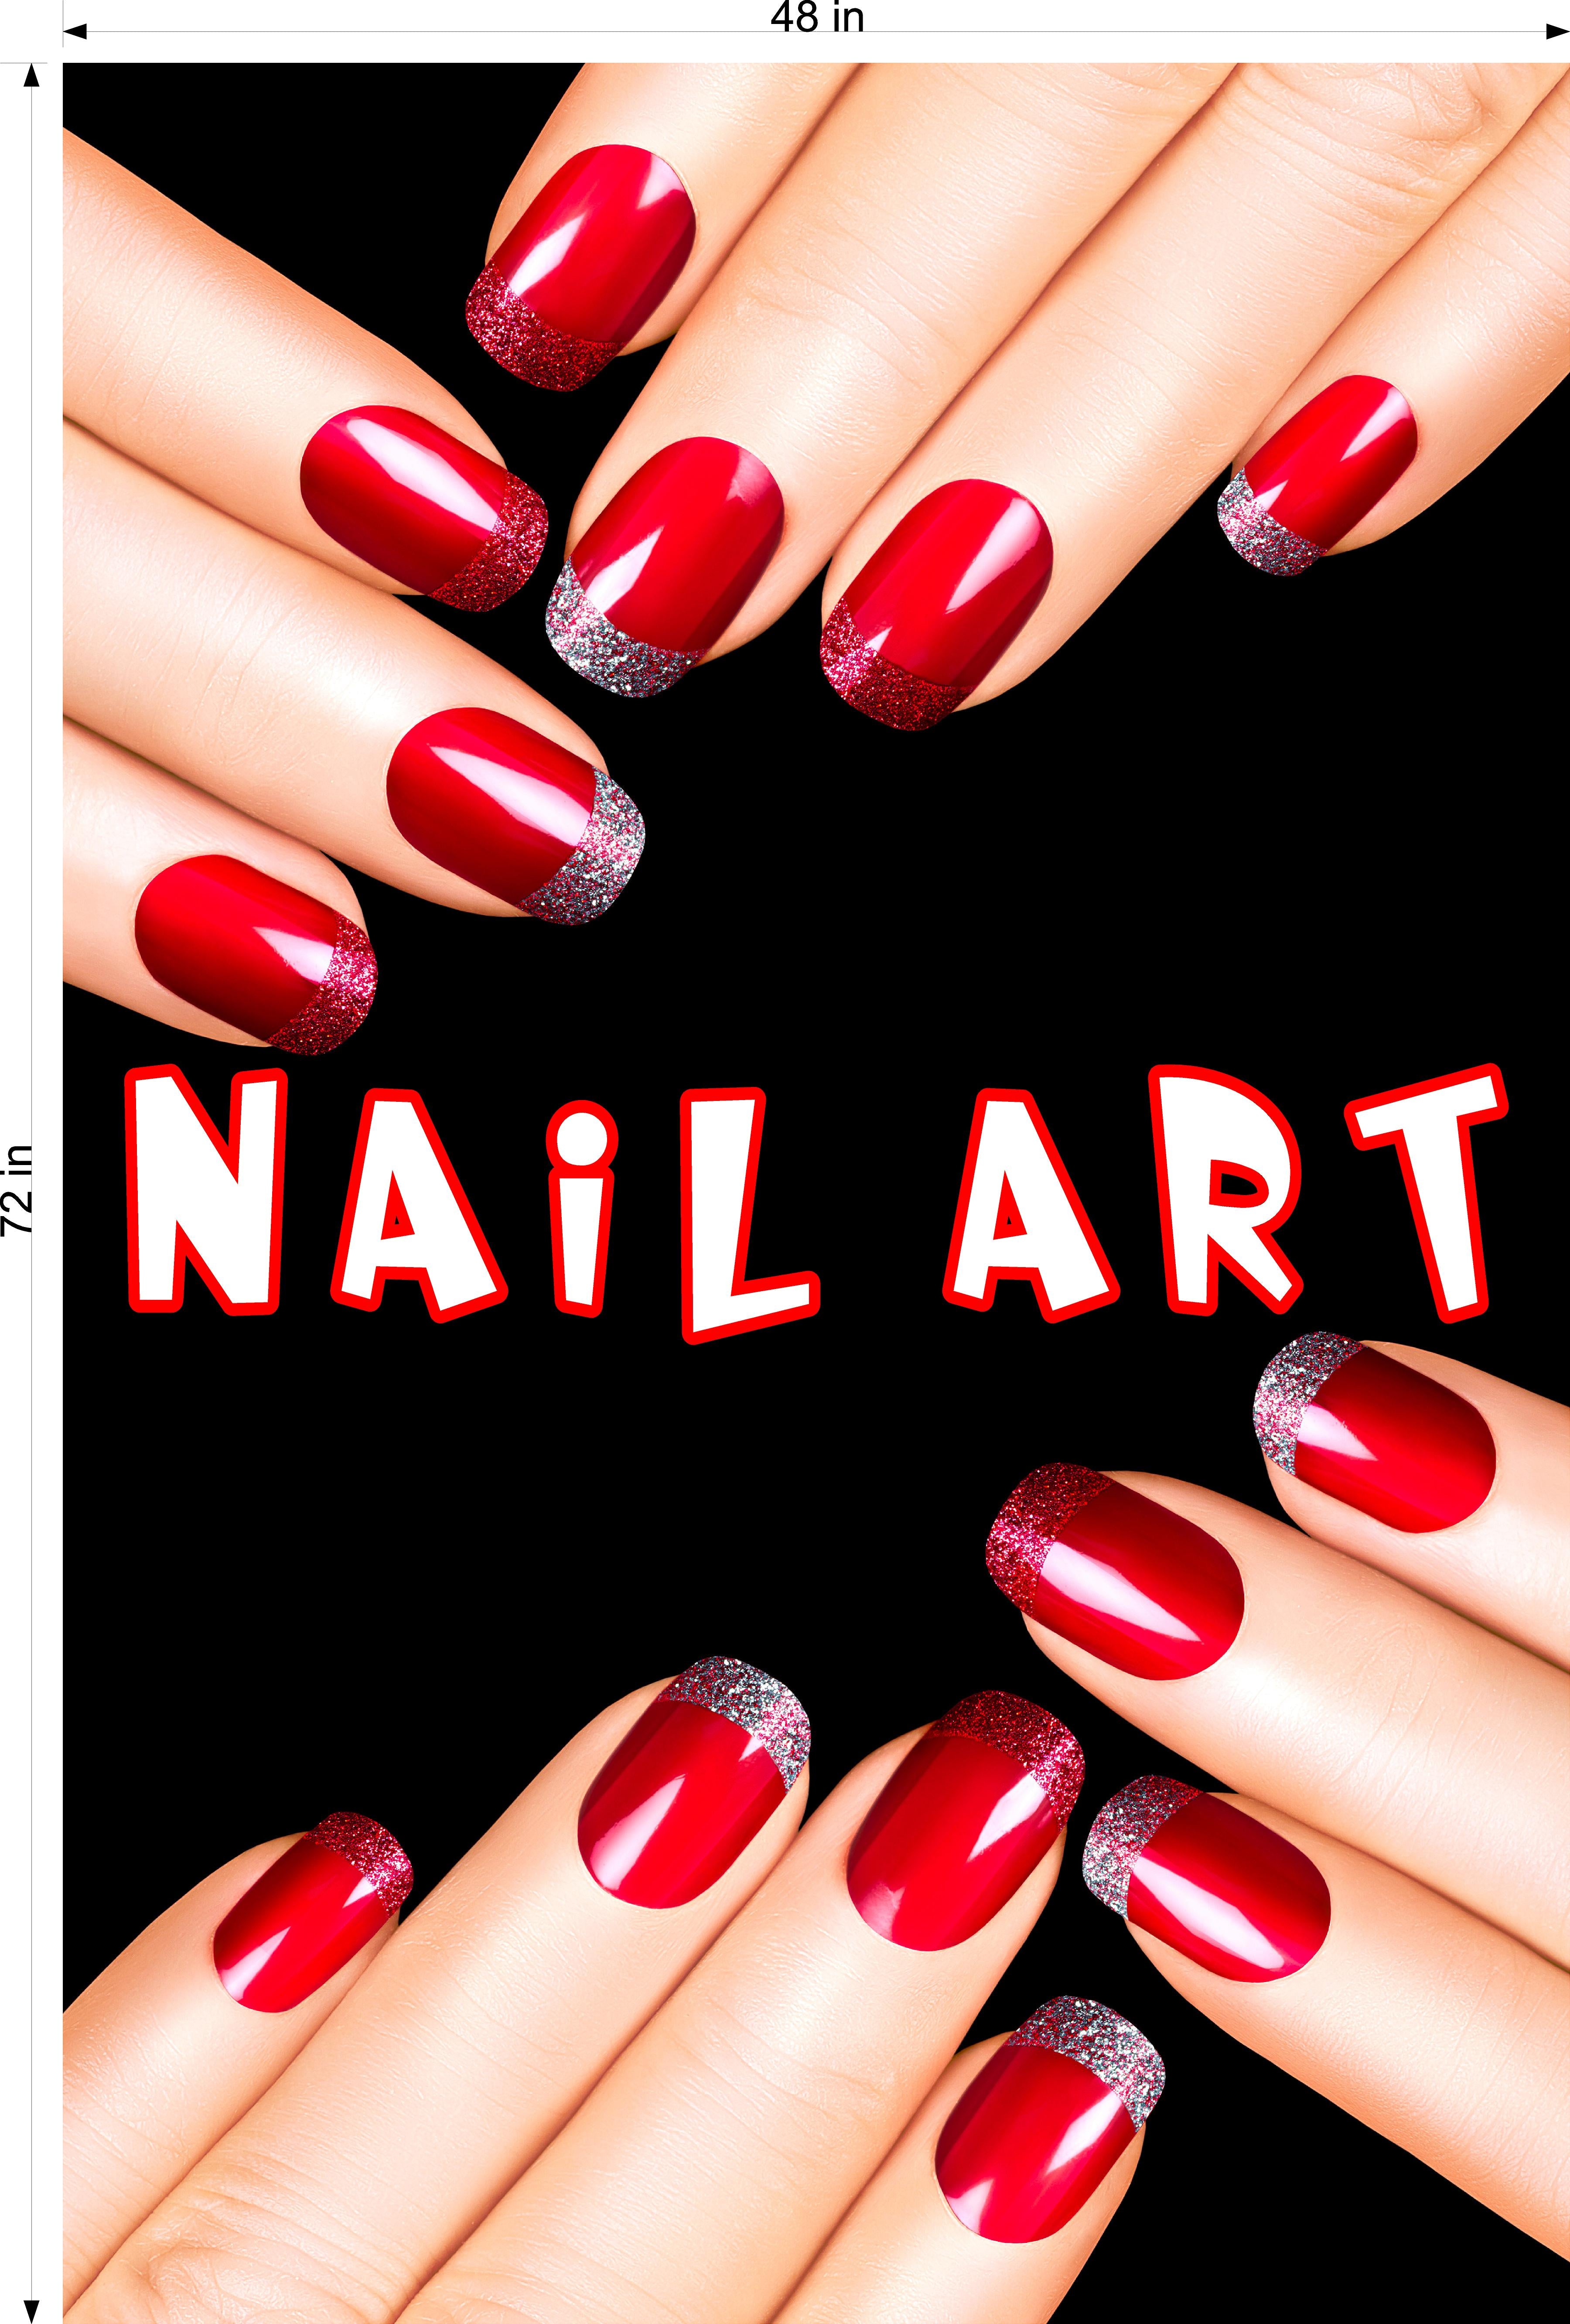 Nail Art 07 Photo-Realistic Paper Poster Premium Interior Inside Sign Advertising Marketing Wall Window Non-Laminated Vertical